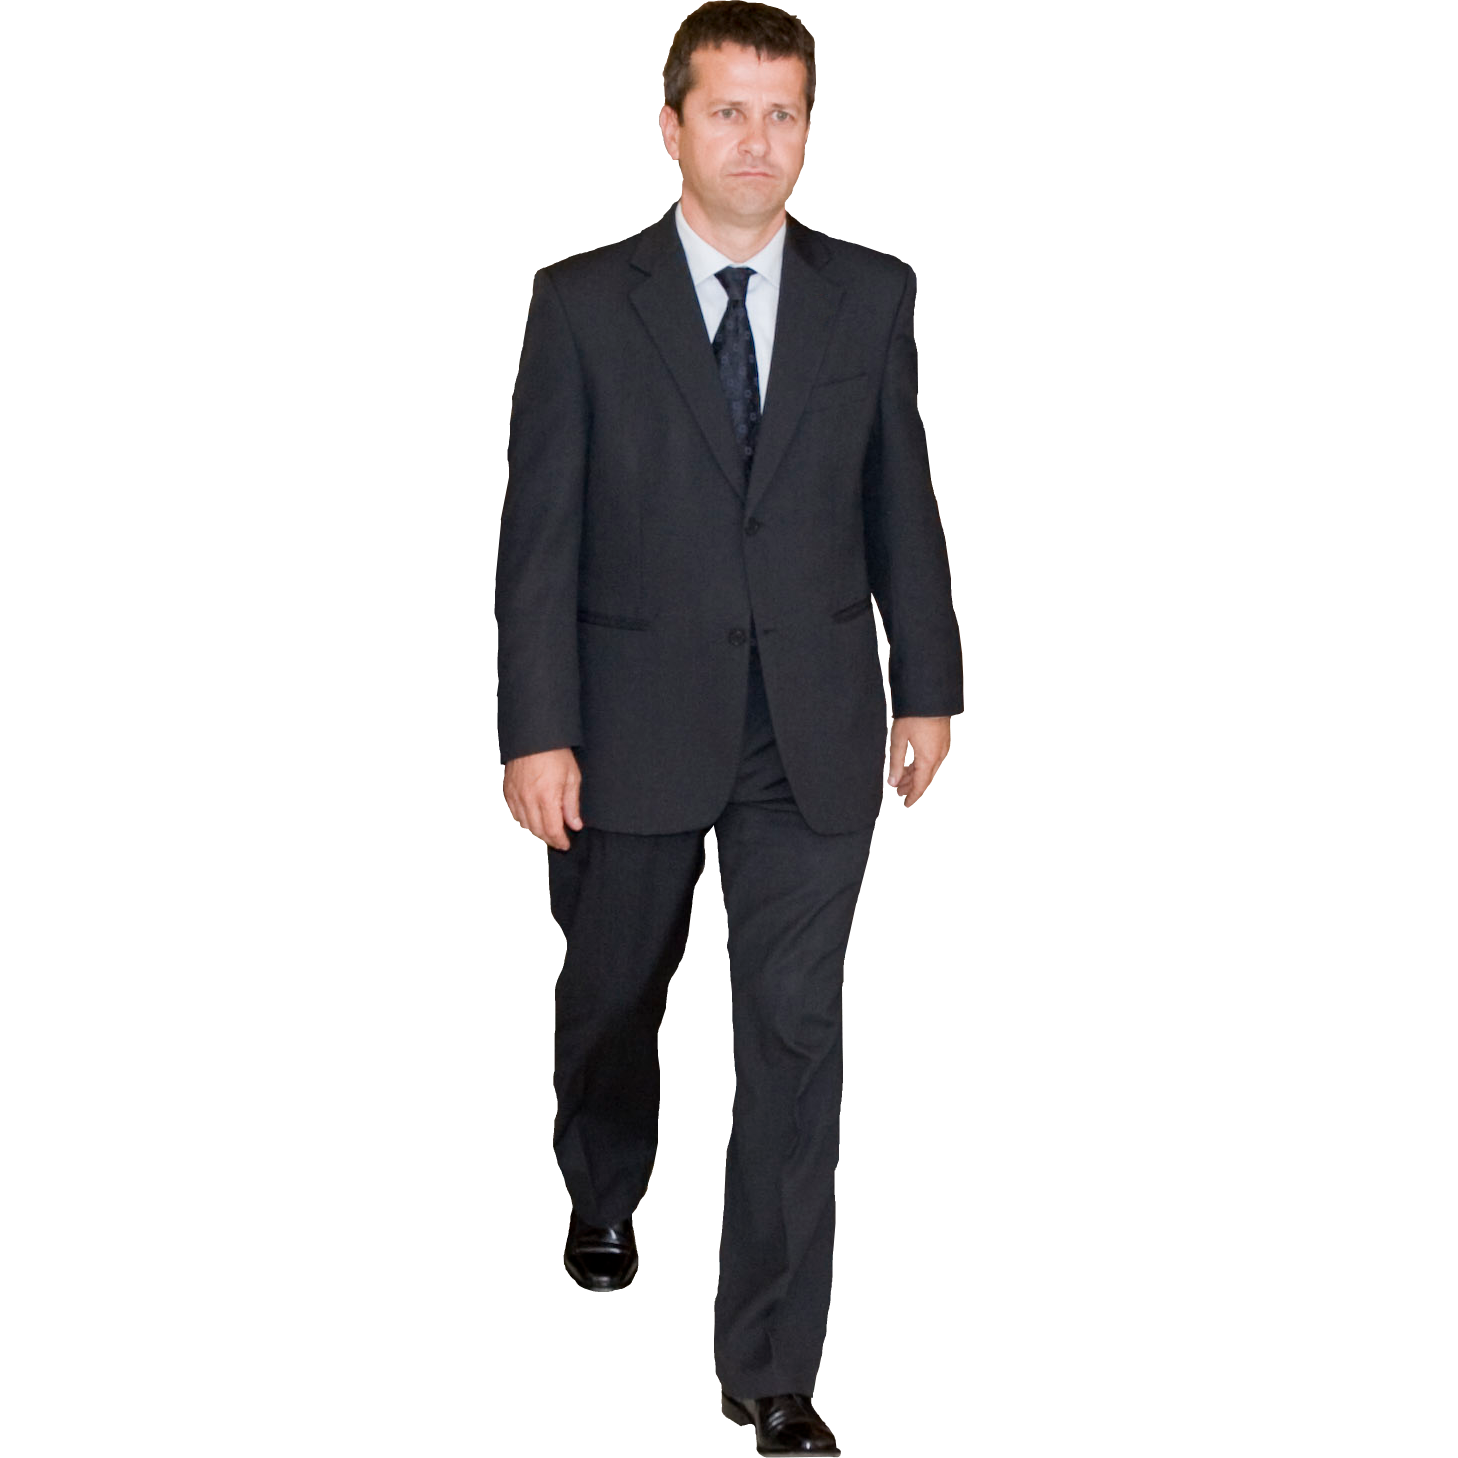 Man In Suit Walking Png Transparent Background Free Download 9463 Freeiconspng